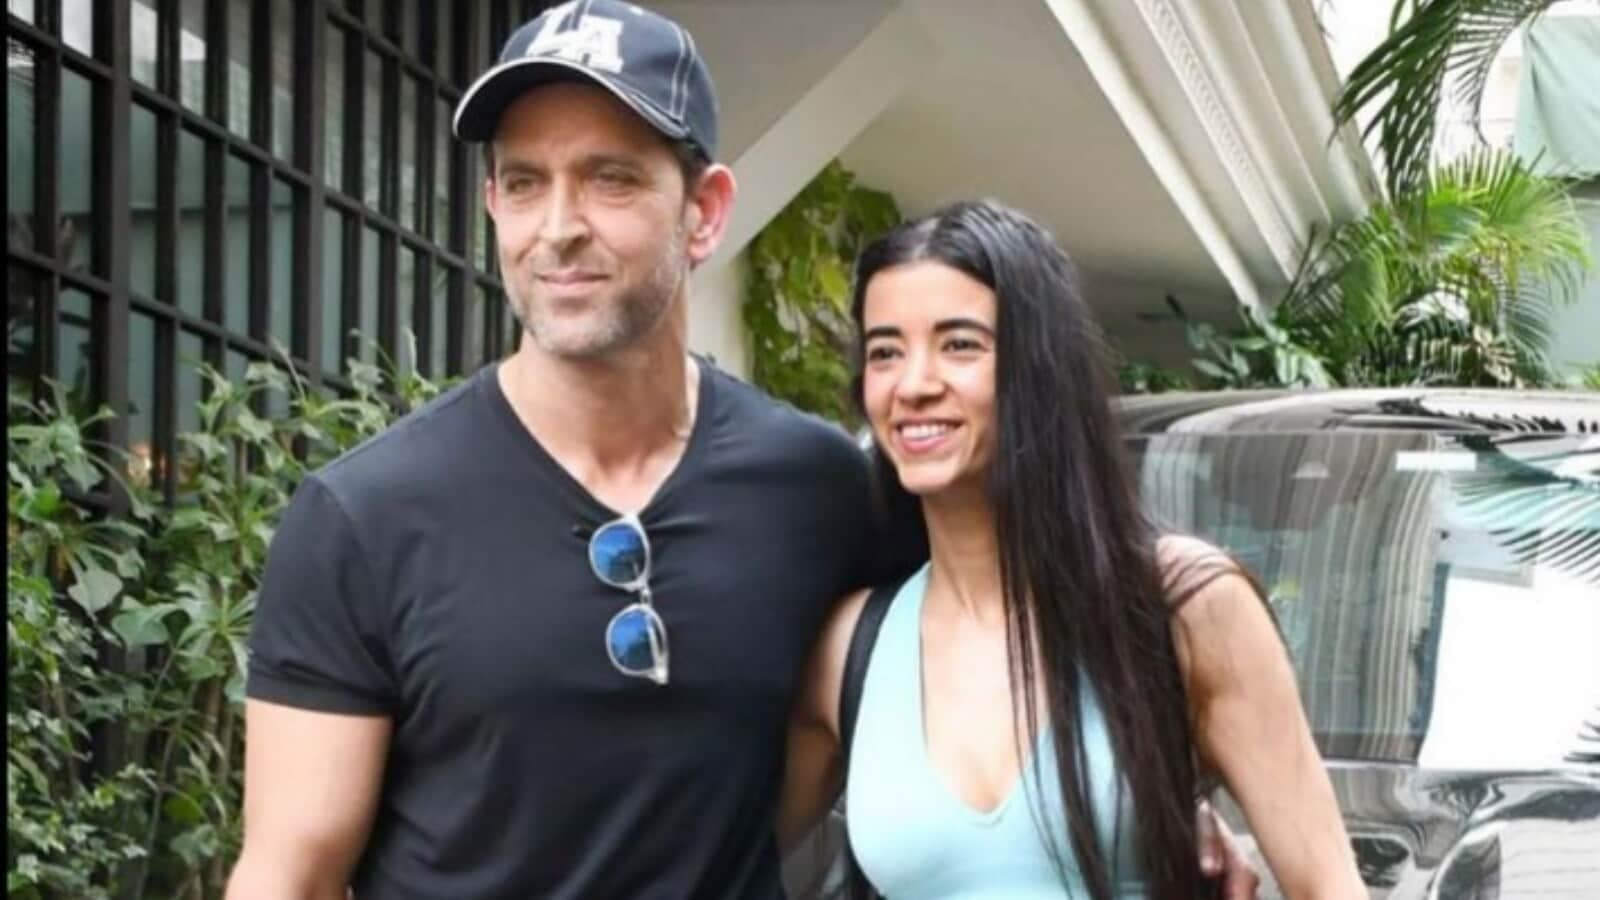 Hrithik Roshan says ‘there’s no truth’ to reports that he, Saba Azad are moving in together: ‘Keep misinformation away’